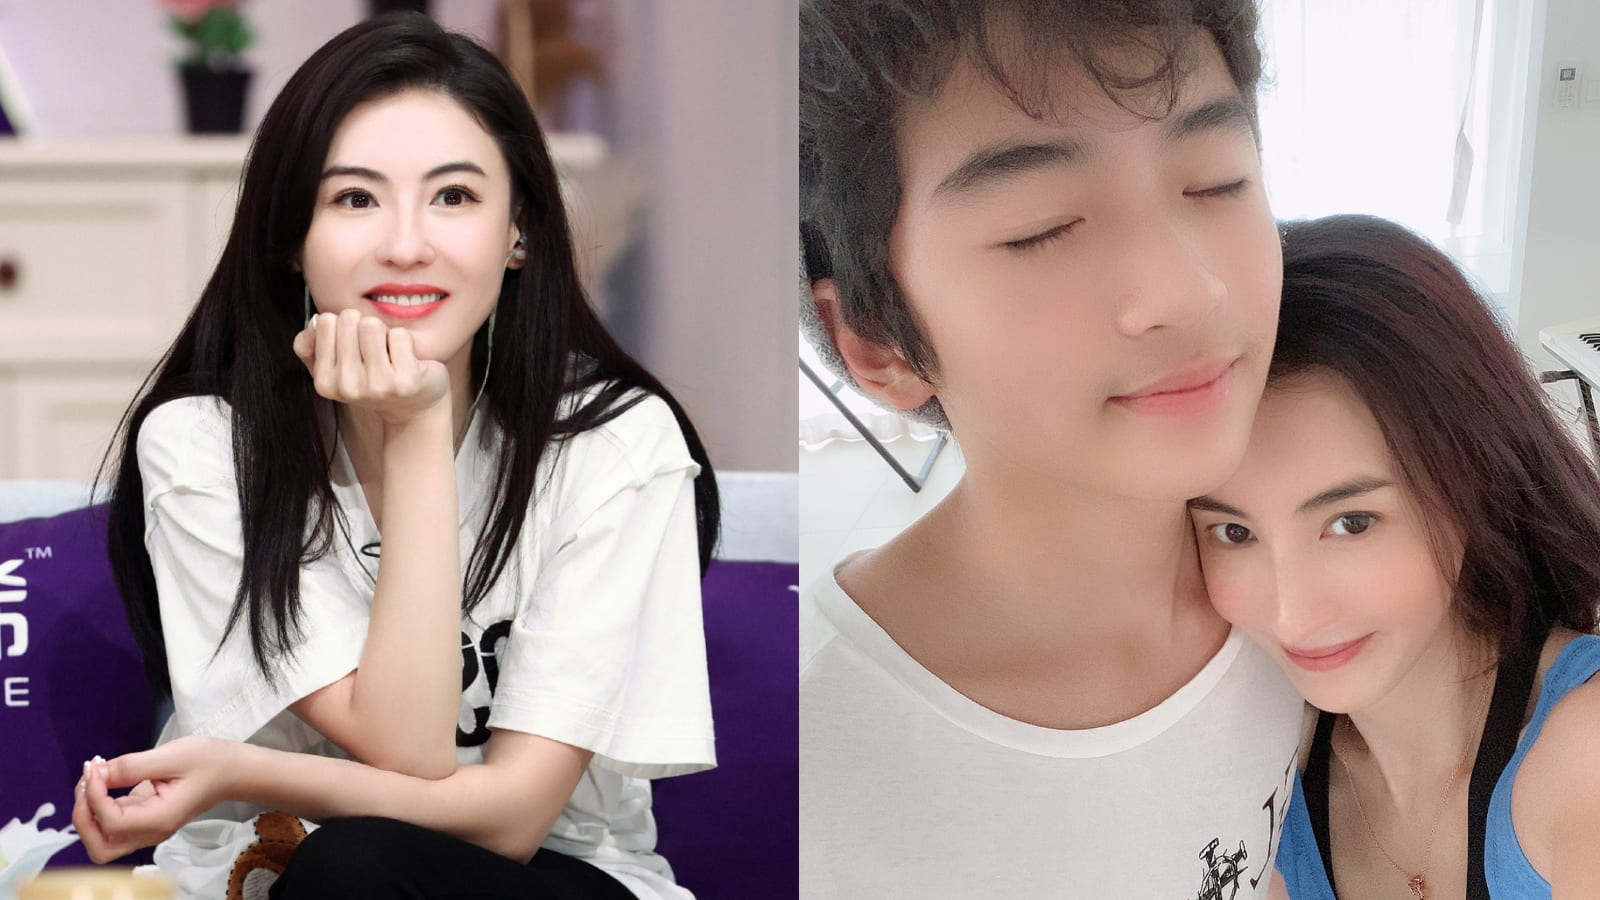 Cecilia Cheung Not Against Sons Joining Showbiz If They Are “Better Than Her Or Their Father” Nicholas Tse